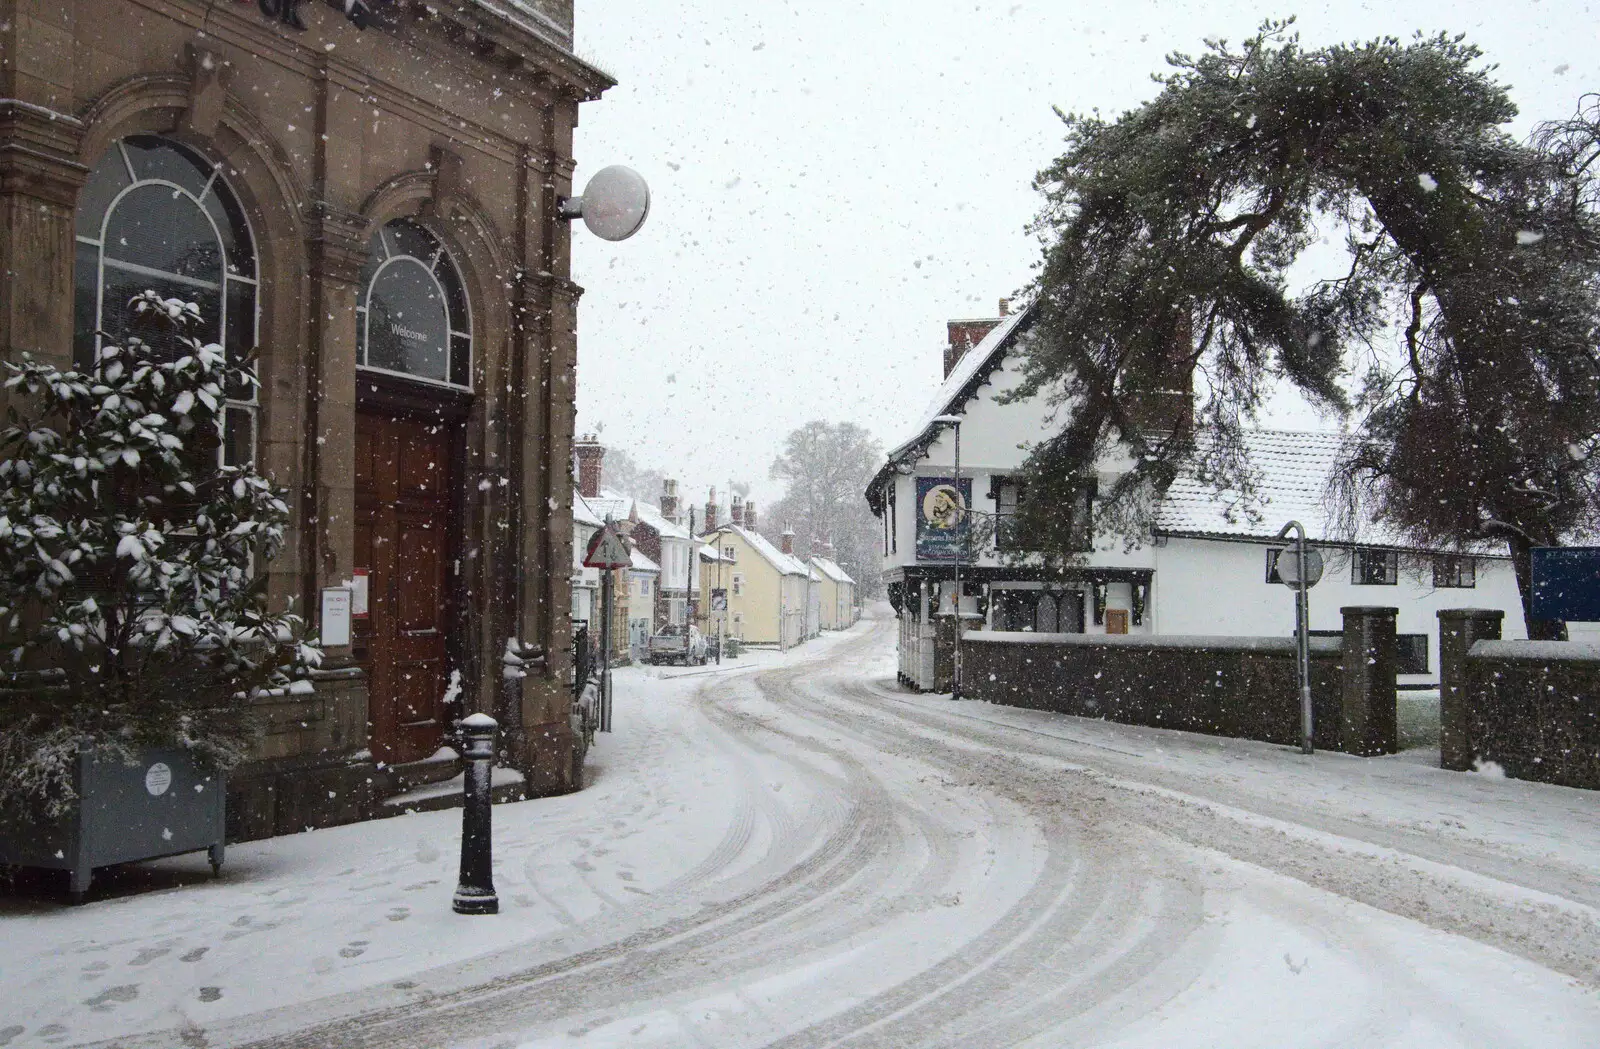 Mount Street and the Saracen's Head, from A Snowy Morning, Diss, Norfolk - 16th January 2021